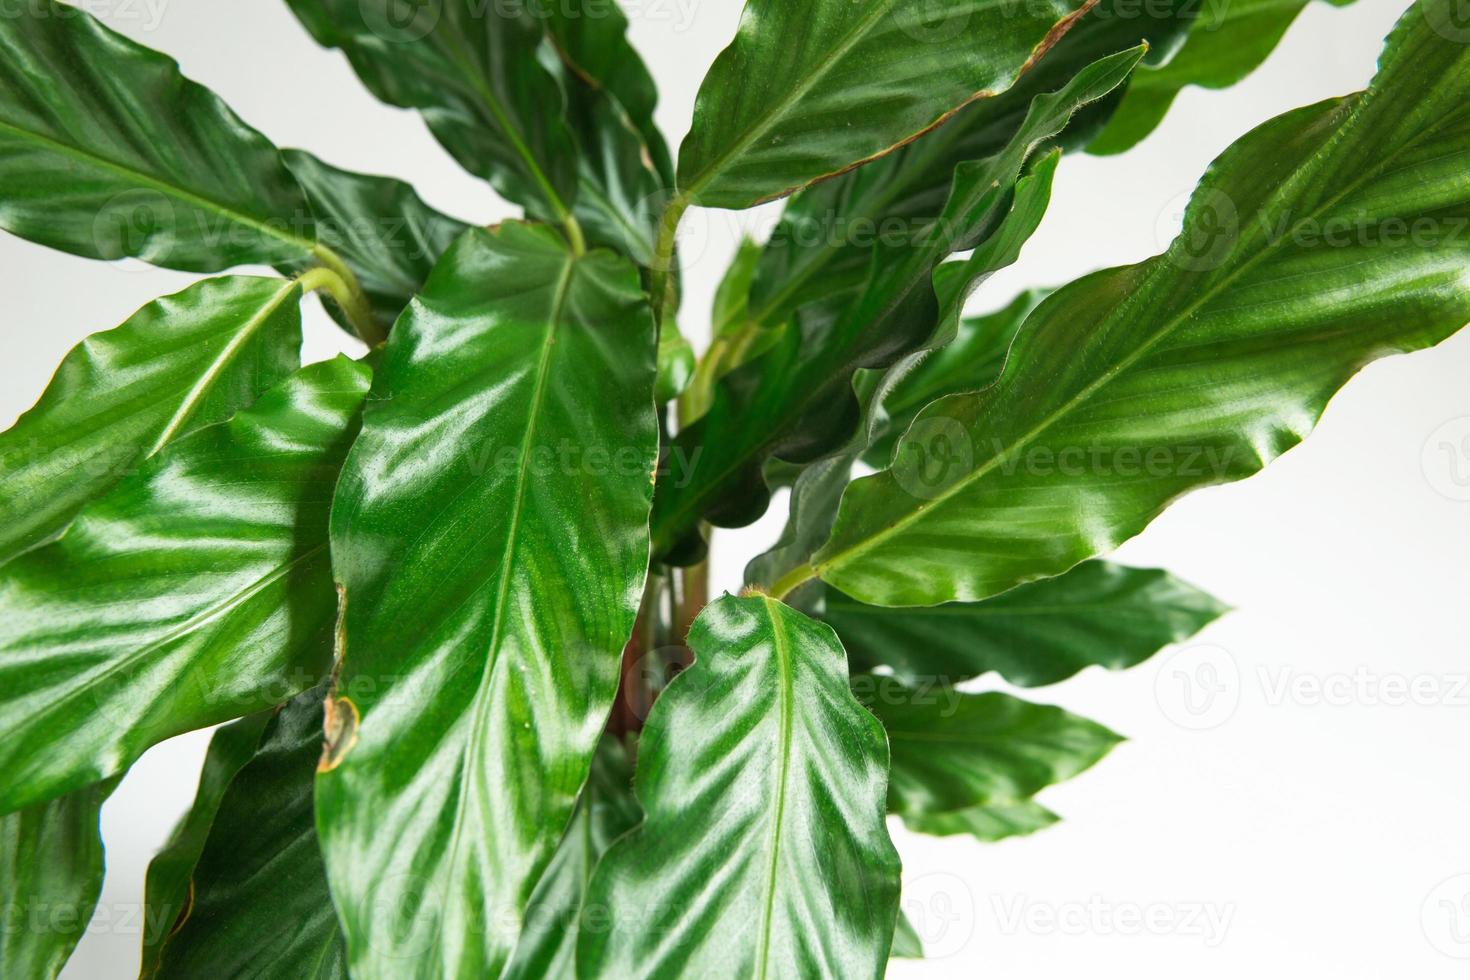 Calathea rufibarba green velvet leaf close-up. Potted house plants, green home decor, care and cultivation, marantaceae variety. photo